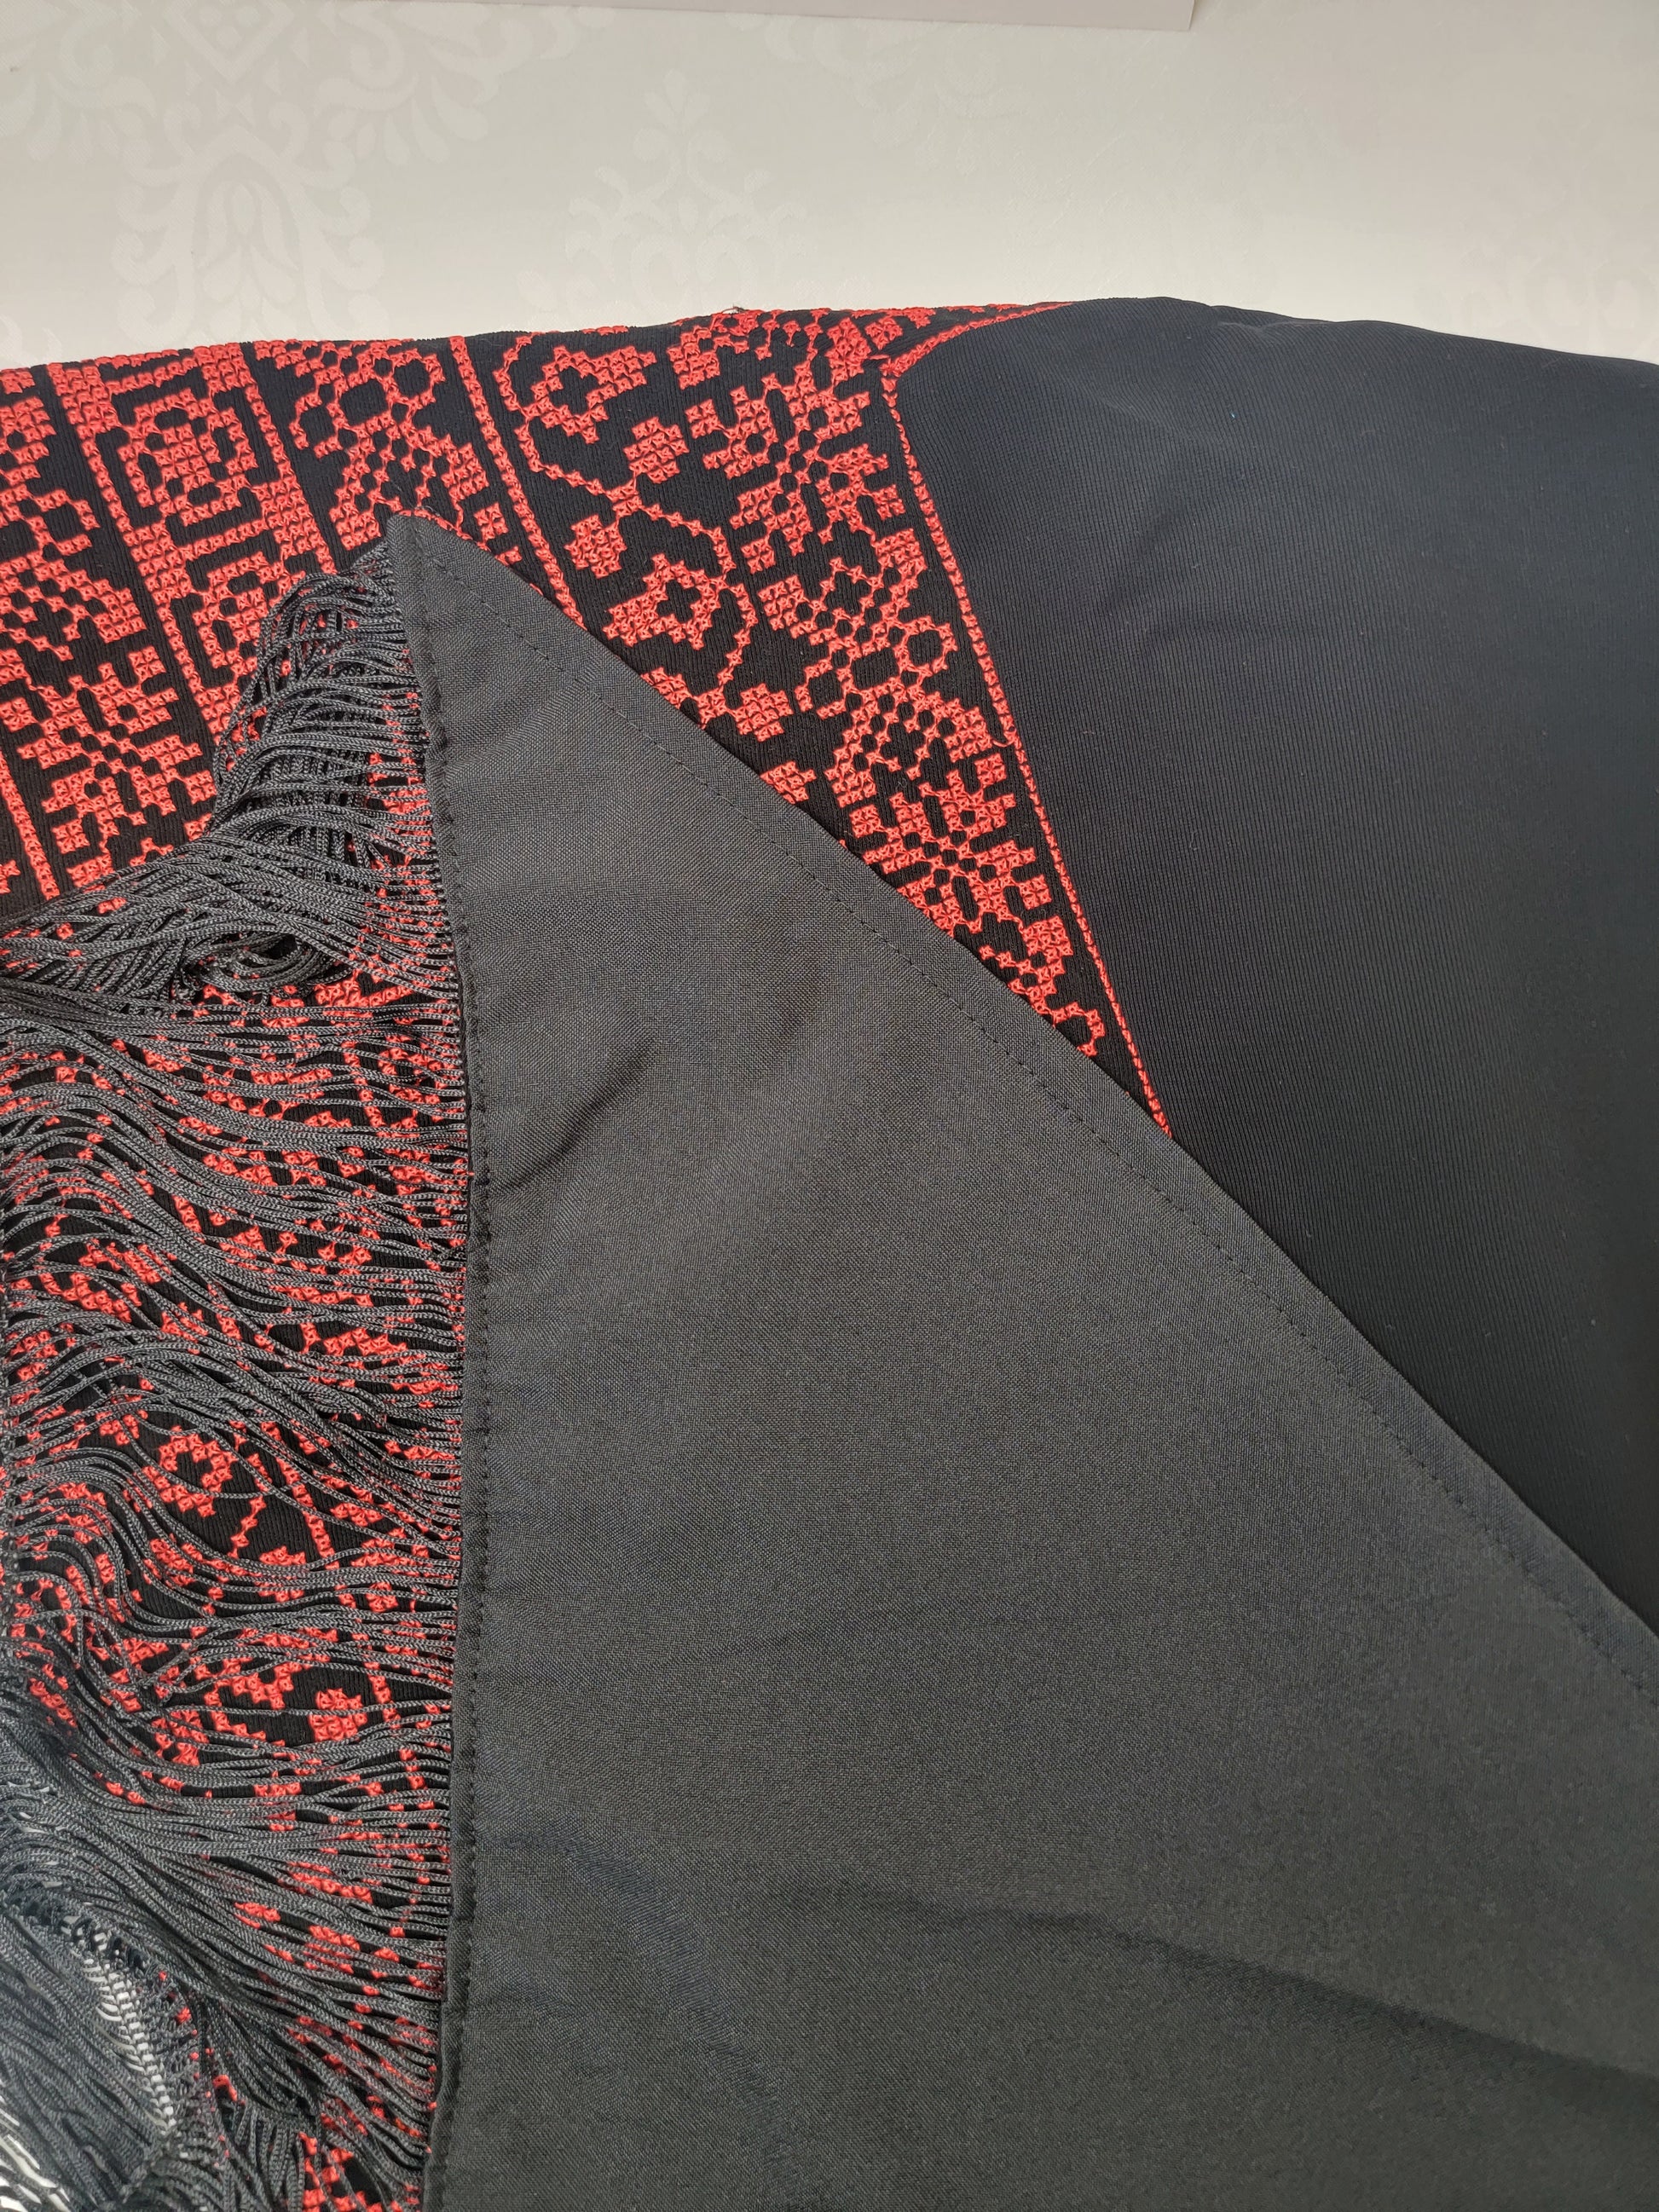 embroidered shawl black and red rajaeen